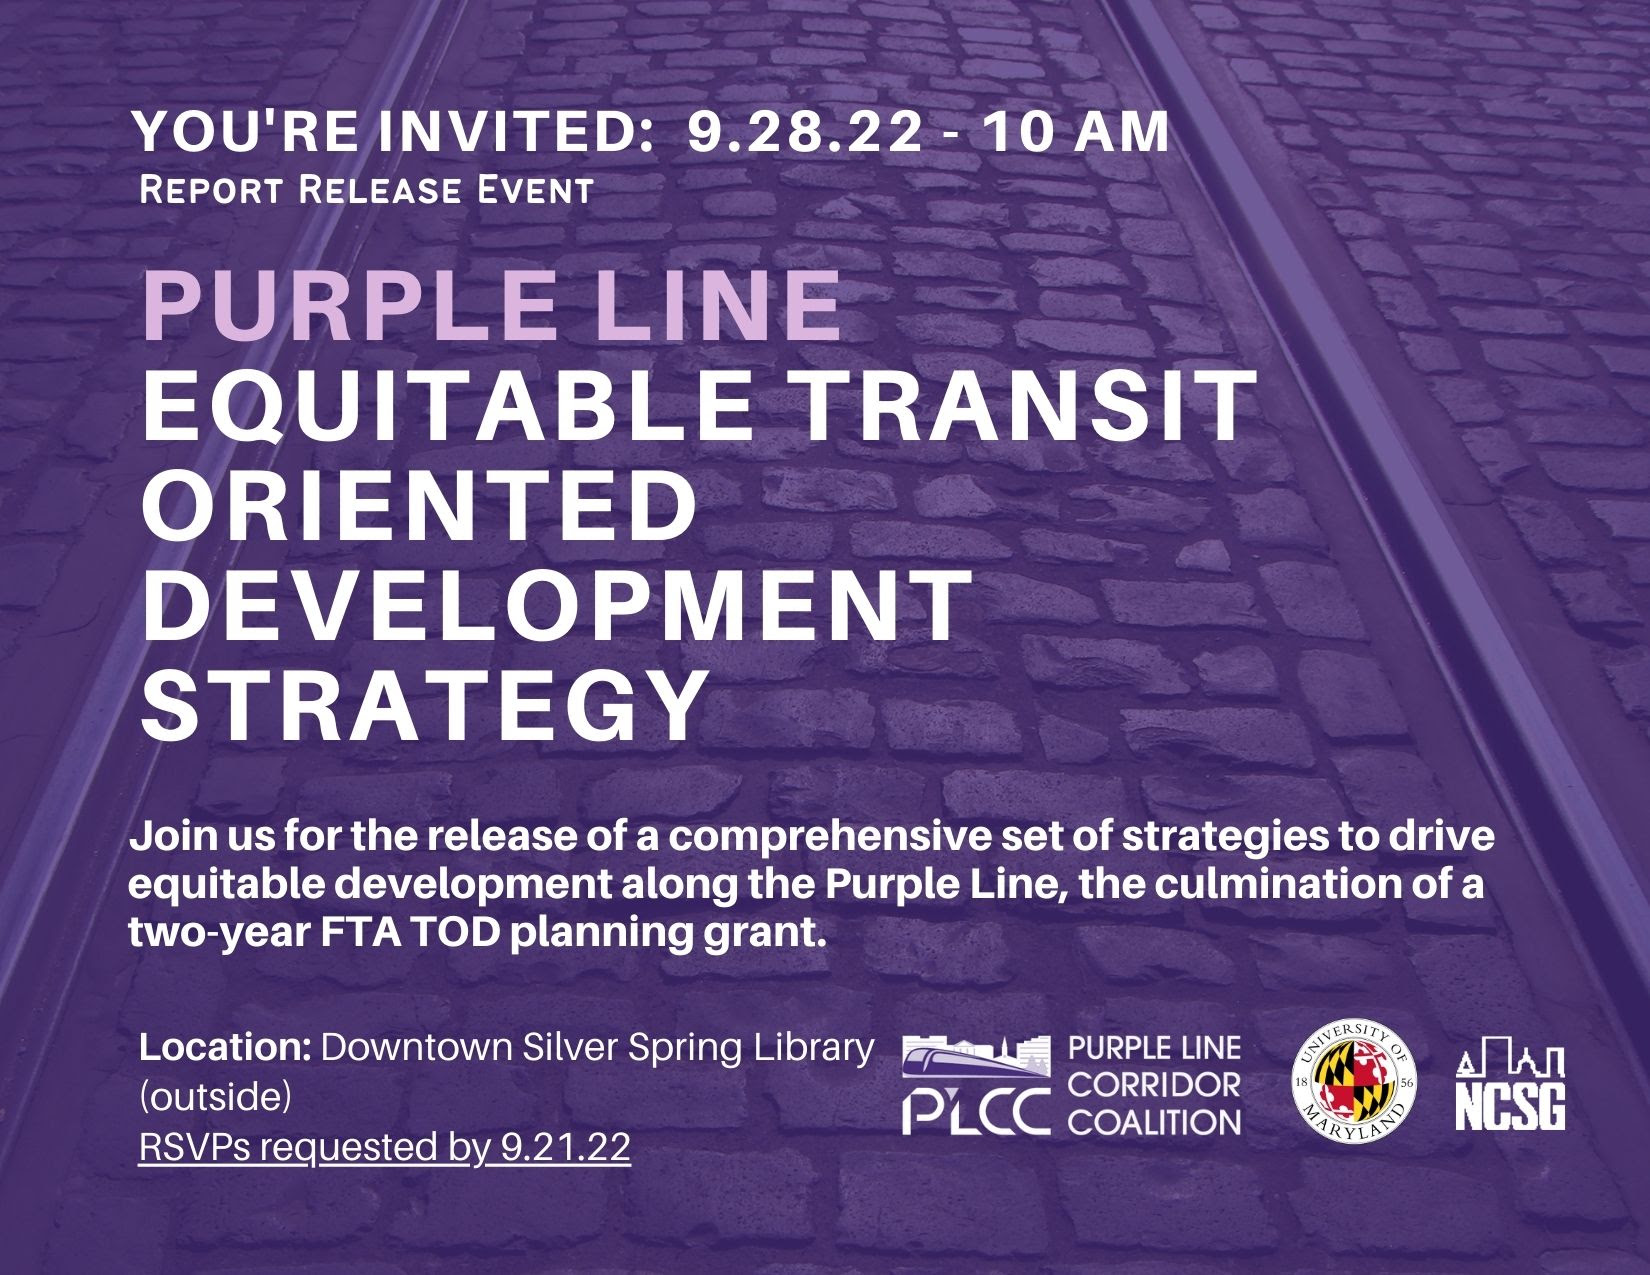 Join us for the release of a Purple Line ETOD strategy